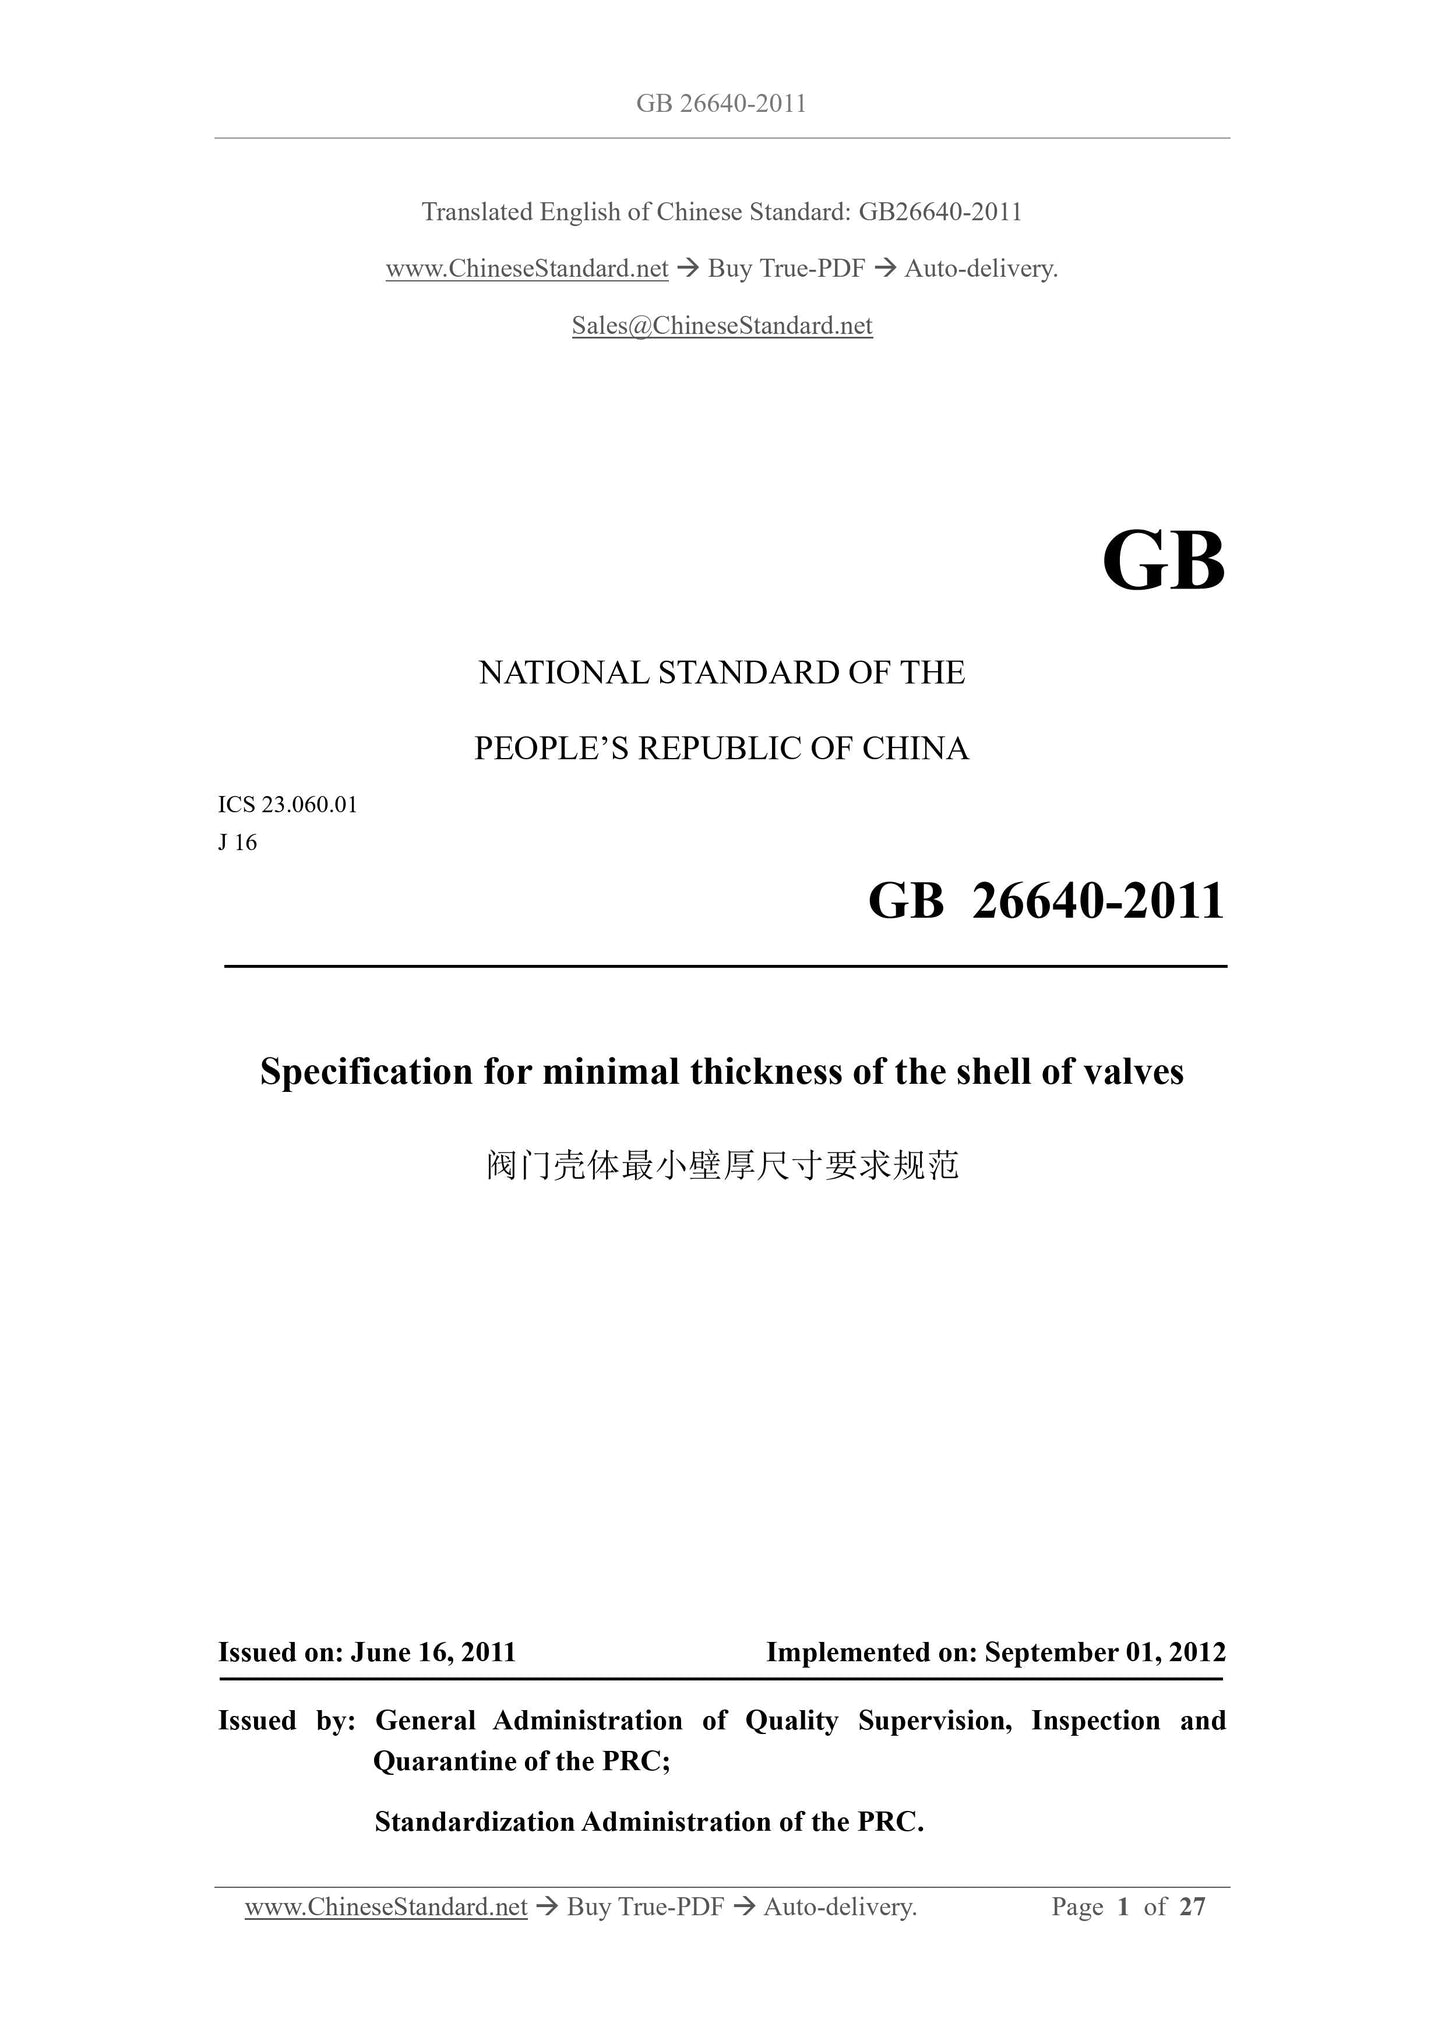 GB 26640-2011 Page 1